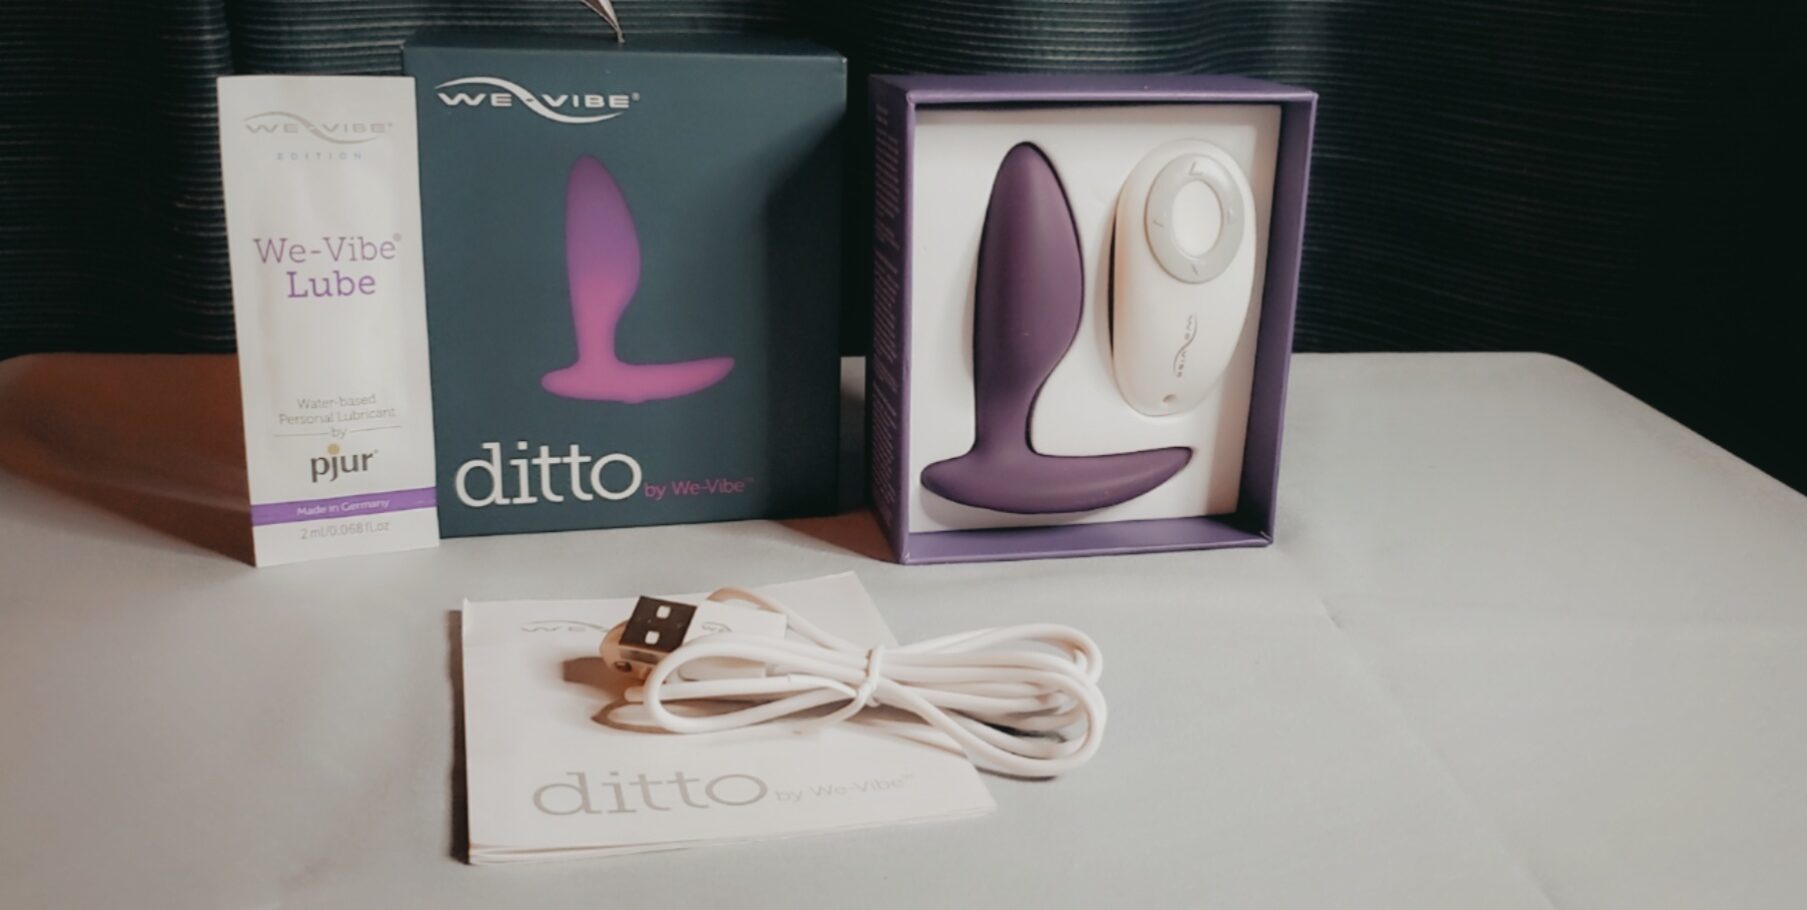 Specifications and features We-Vibe Ditto